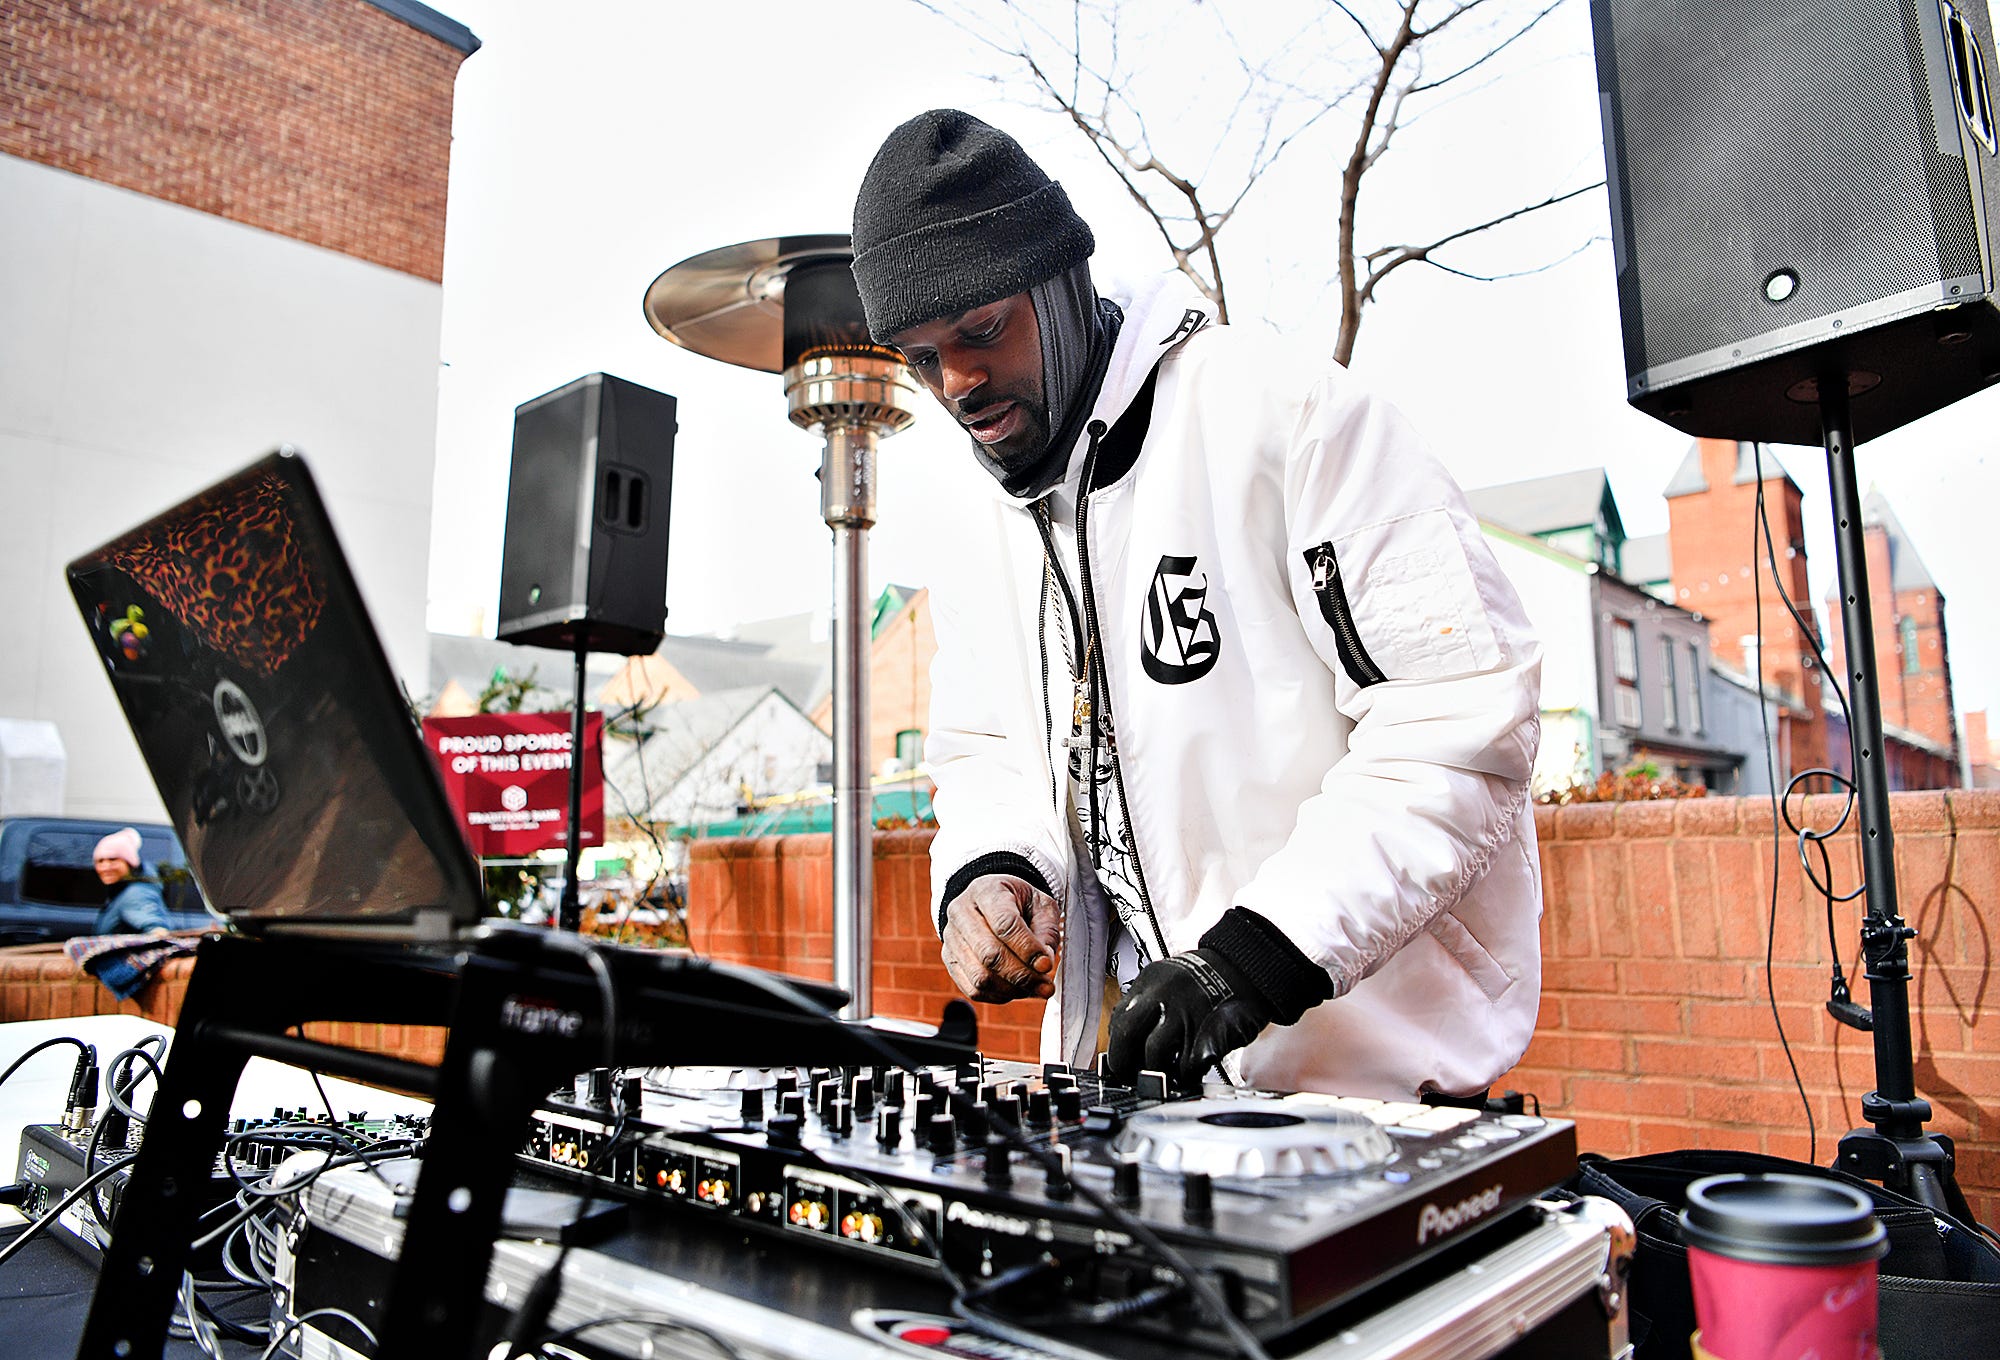 DJ C-Smoke Williams, of York City, provides musical entertainment during the 8th annual FestivICE event in downtown York City, Saturday, Jan. 15, 2022. Dawn J. Sagert photo